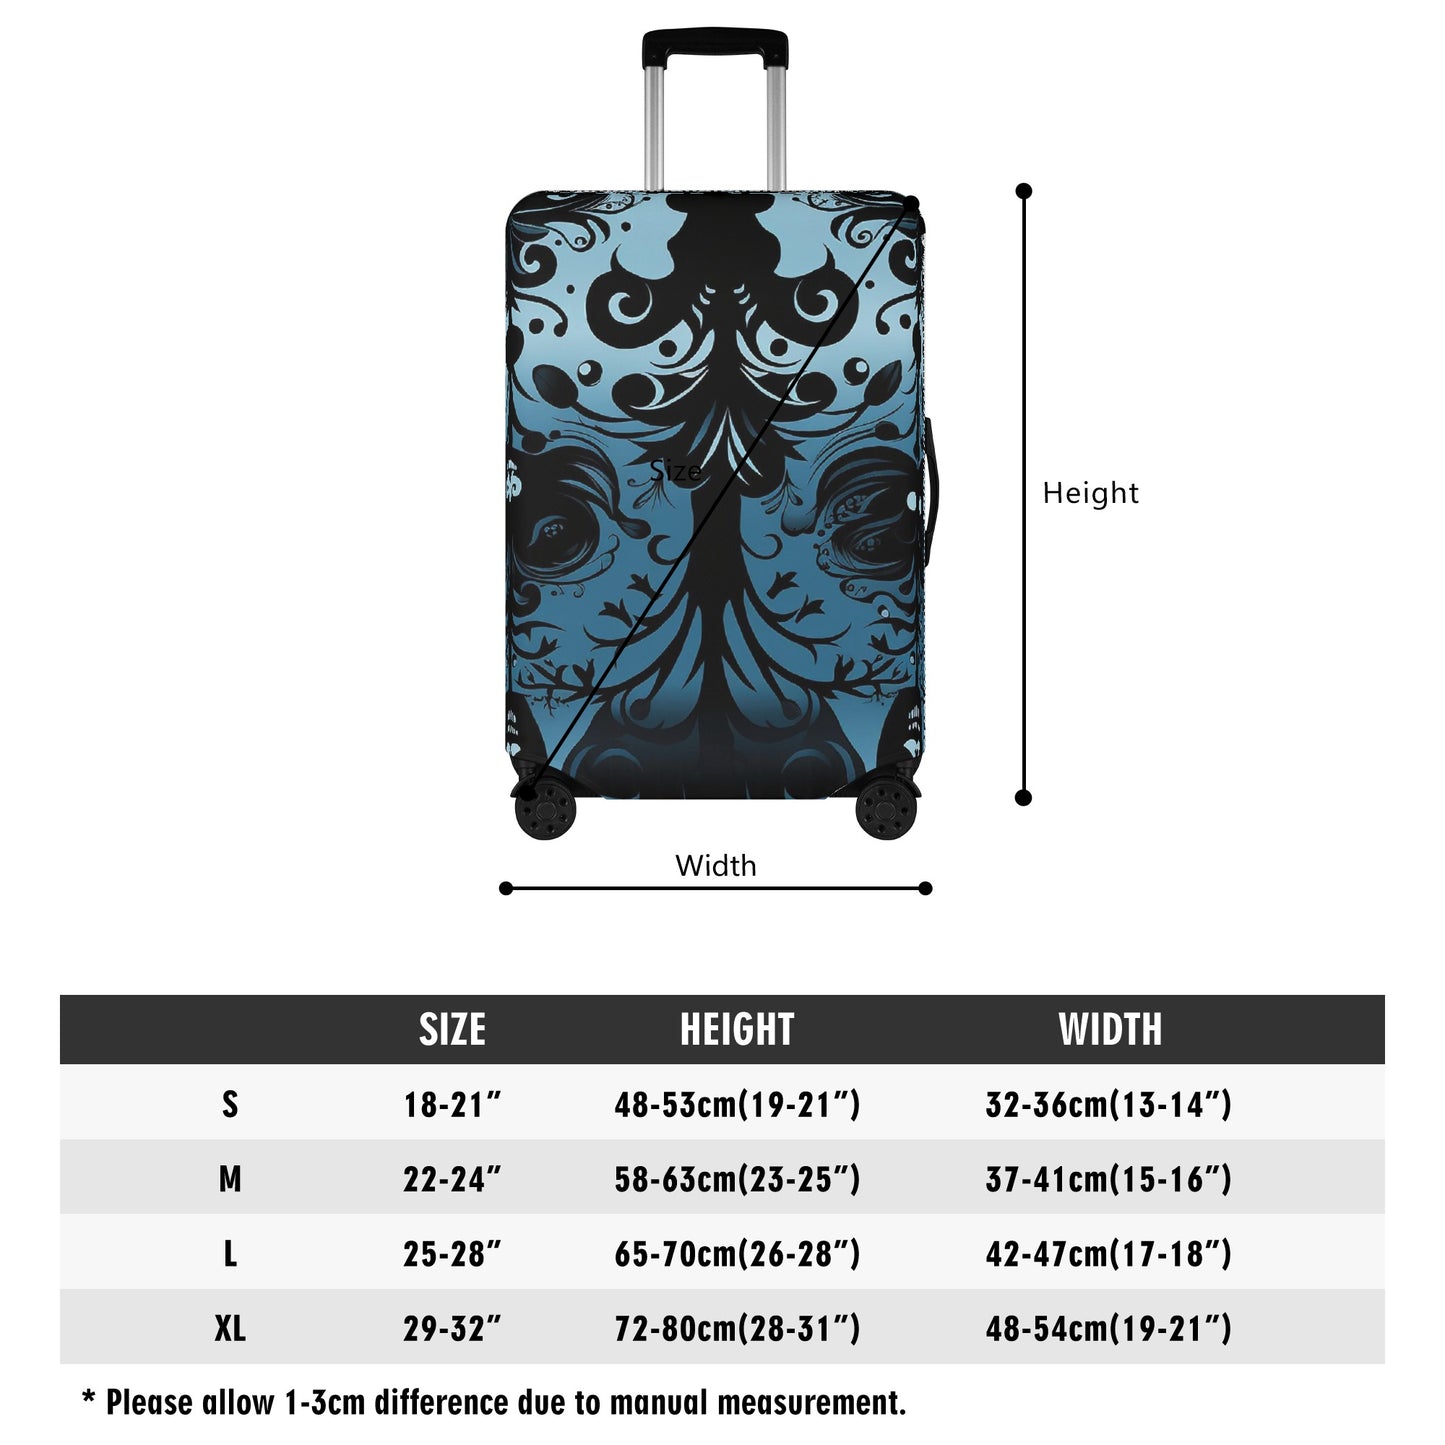 Gothic Blue Design Polyester Luggage Cover